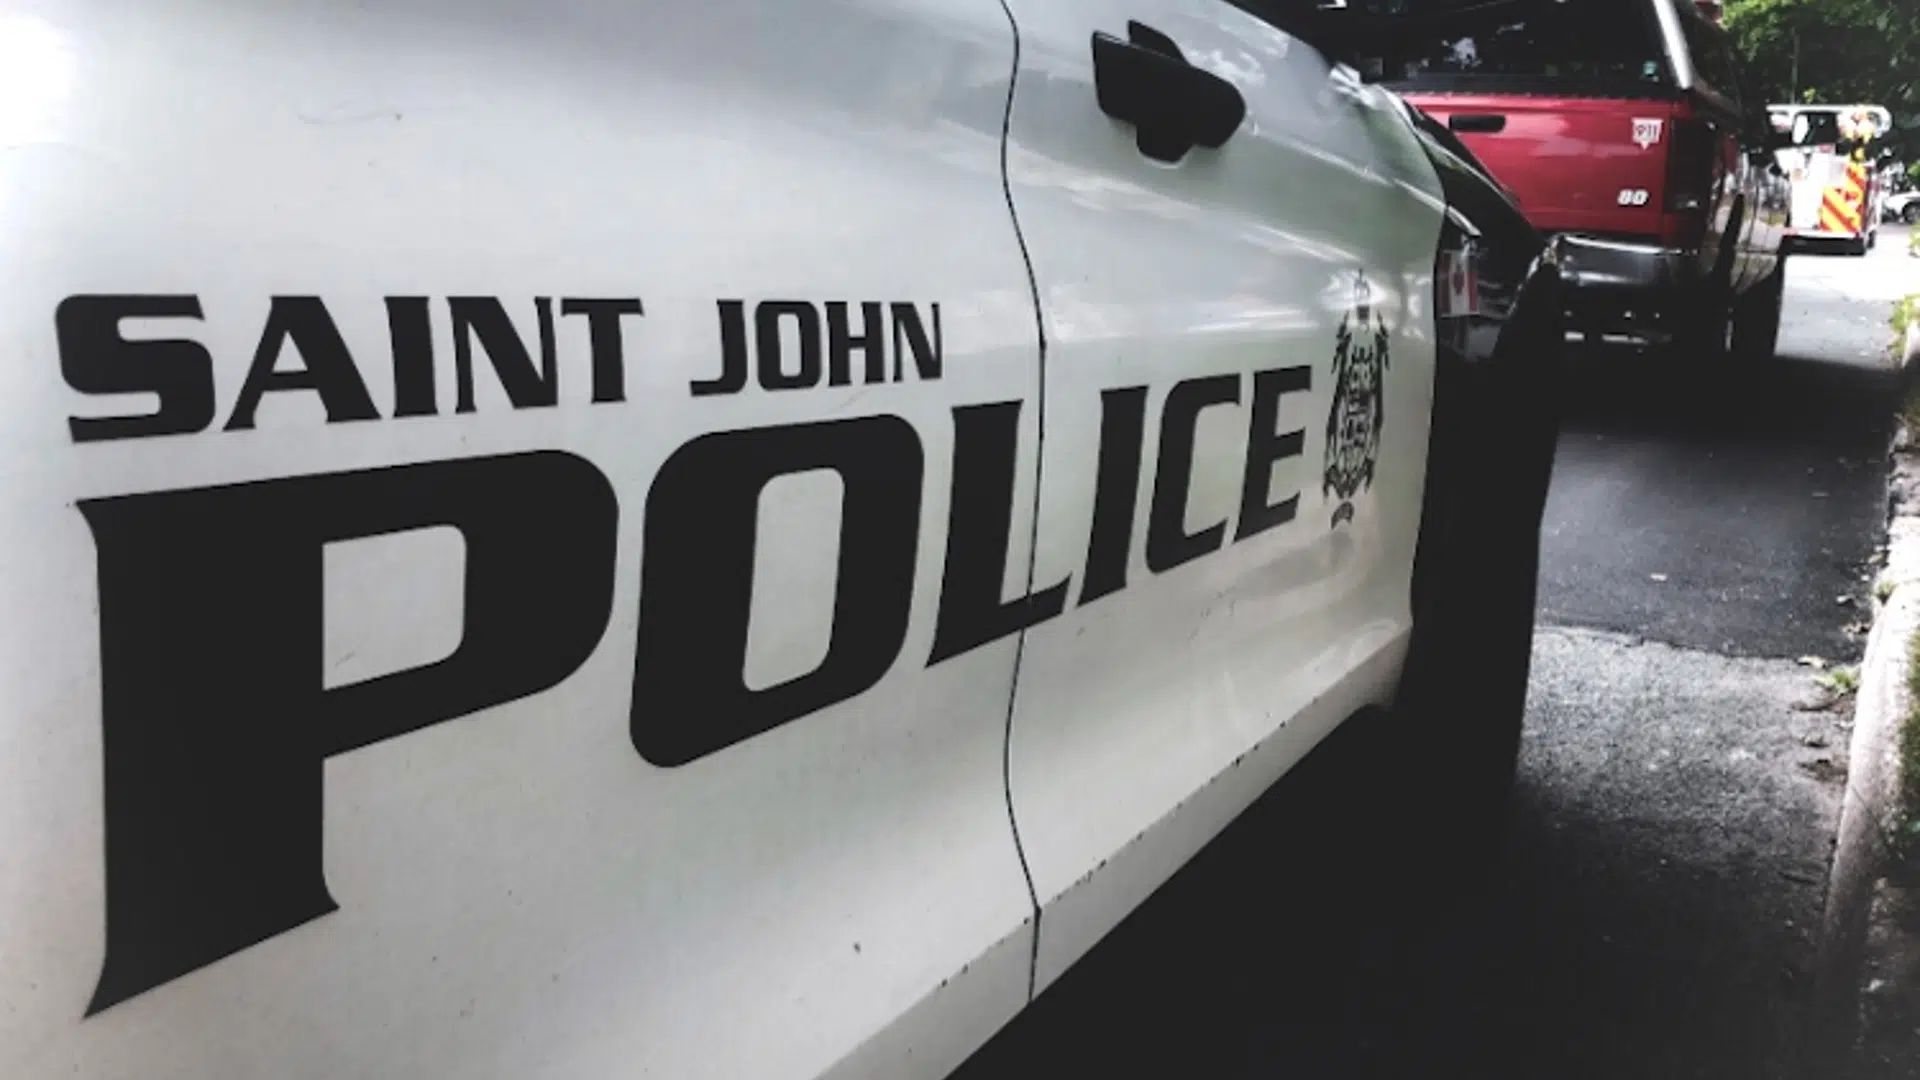 Saint John police made arrest in attempted break-and-enter